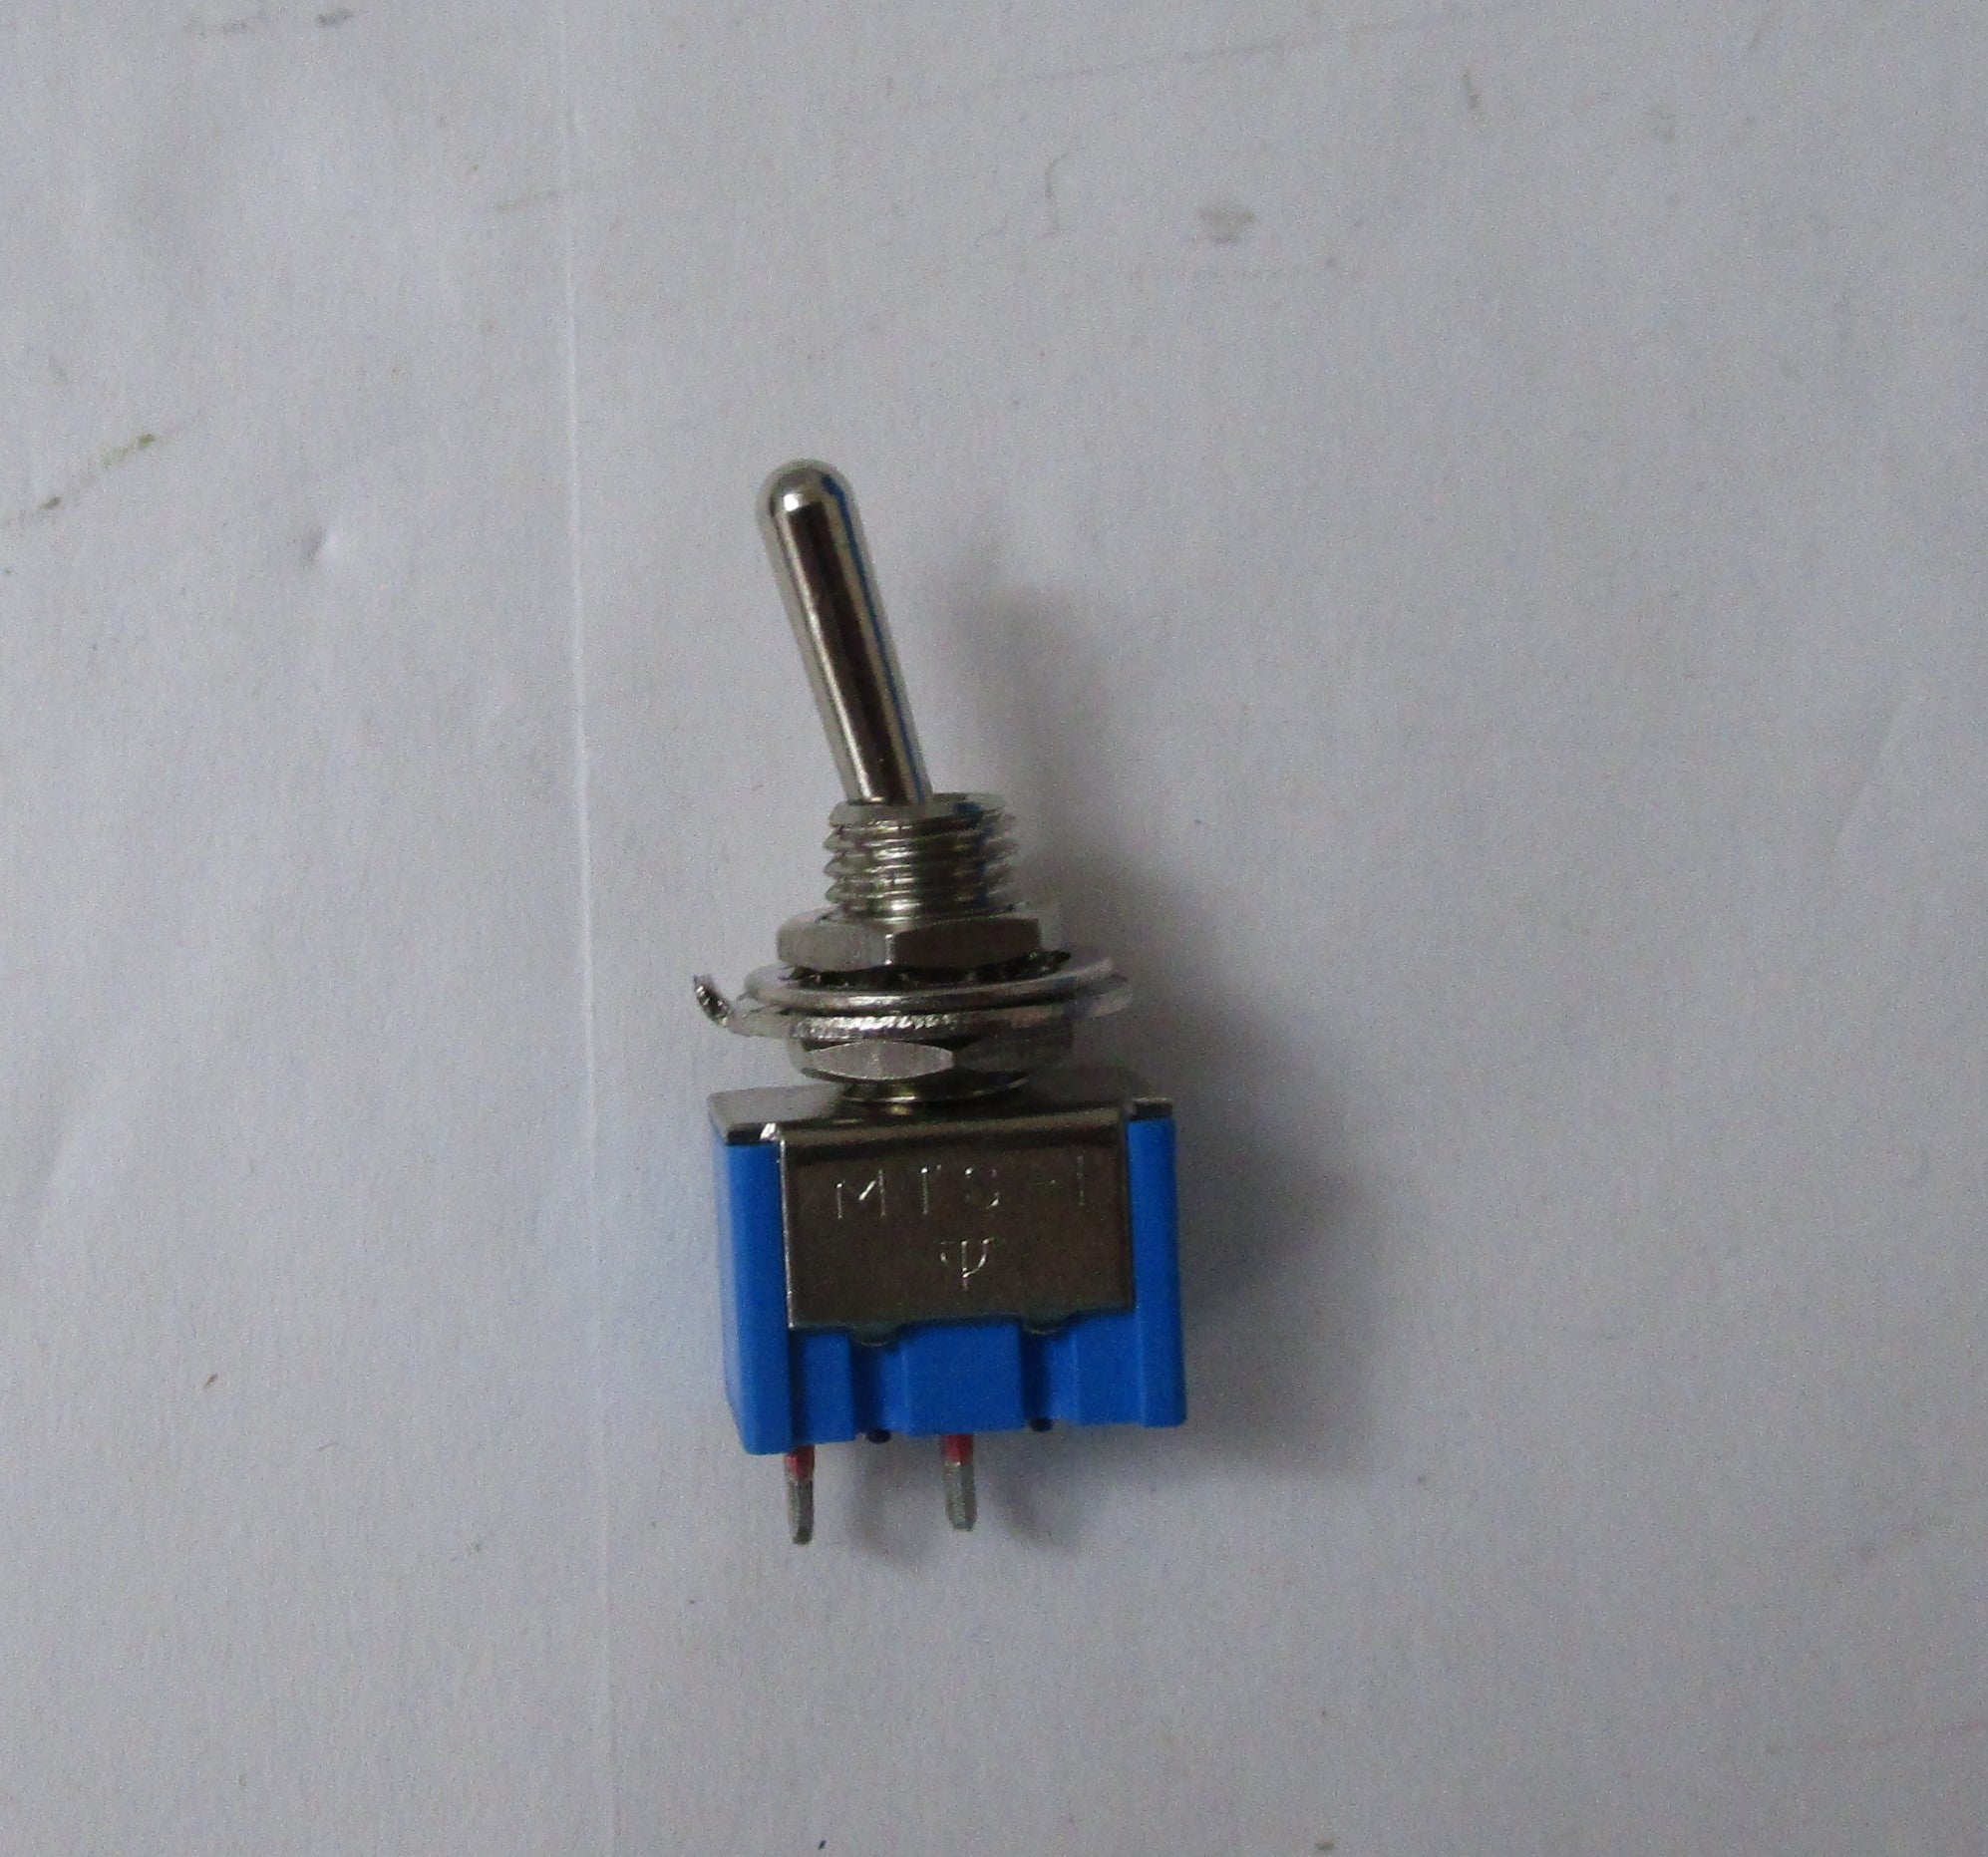 BMT033 SPST Mini Toggle switch ON-OFF 6A @ 125Vac